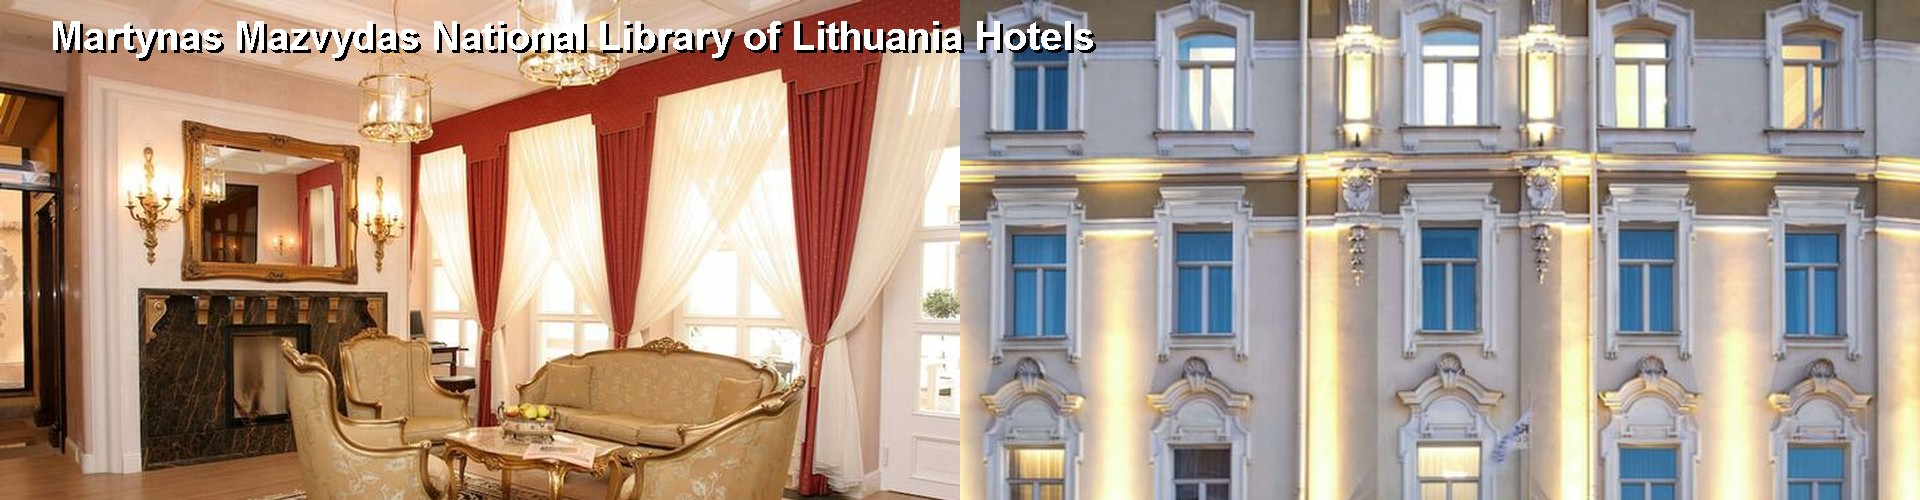 5 Best Hotels near Martynas Mazvydas National Library of Lithuania